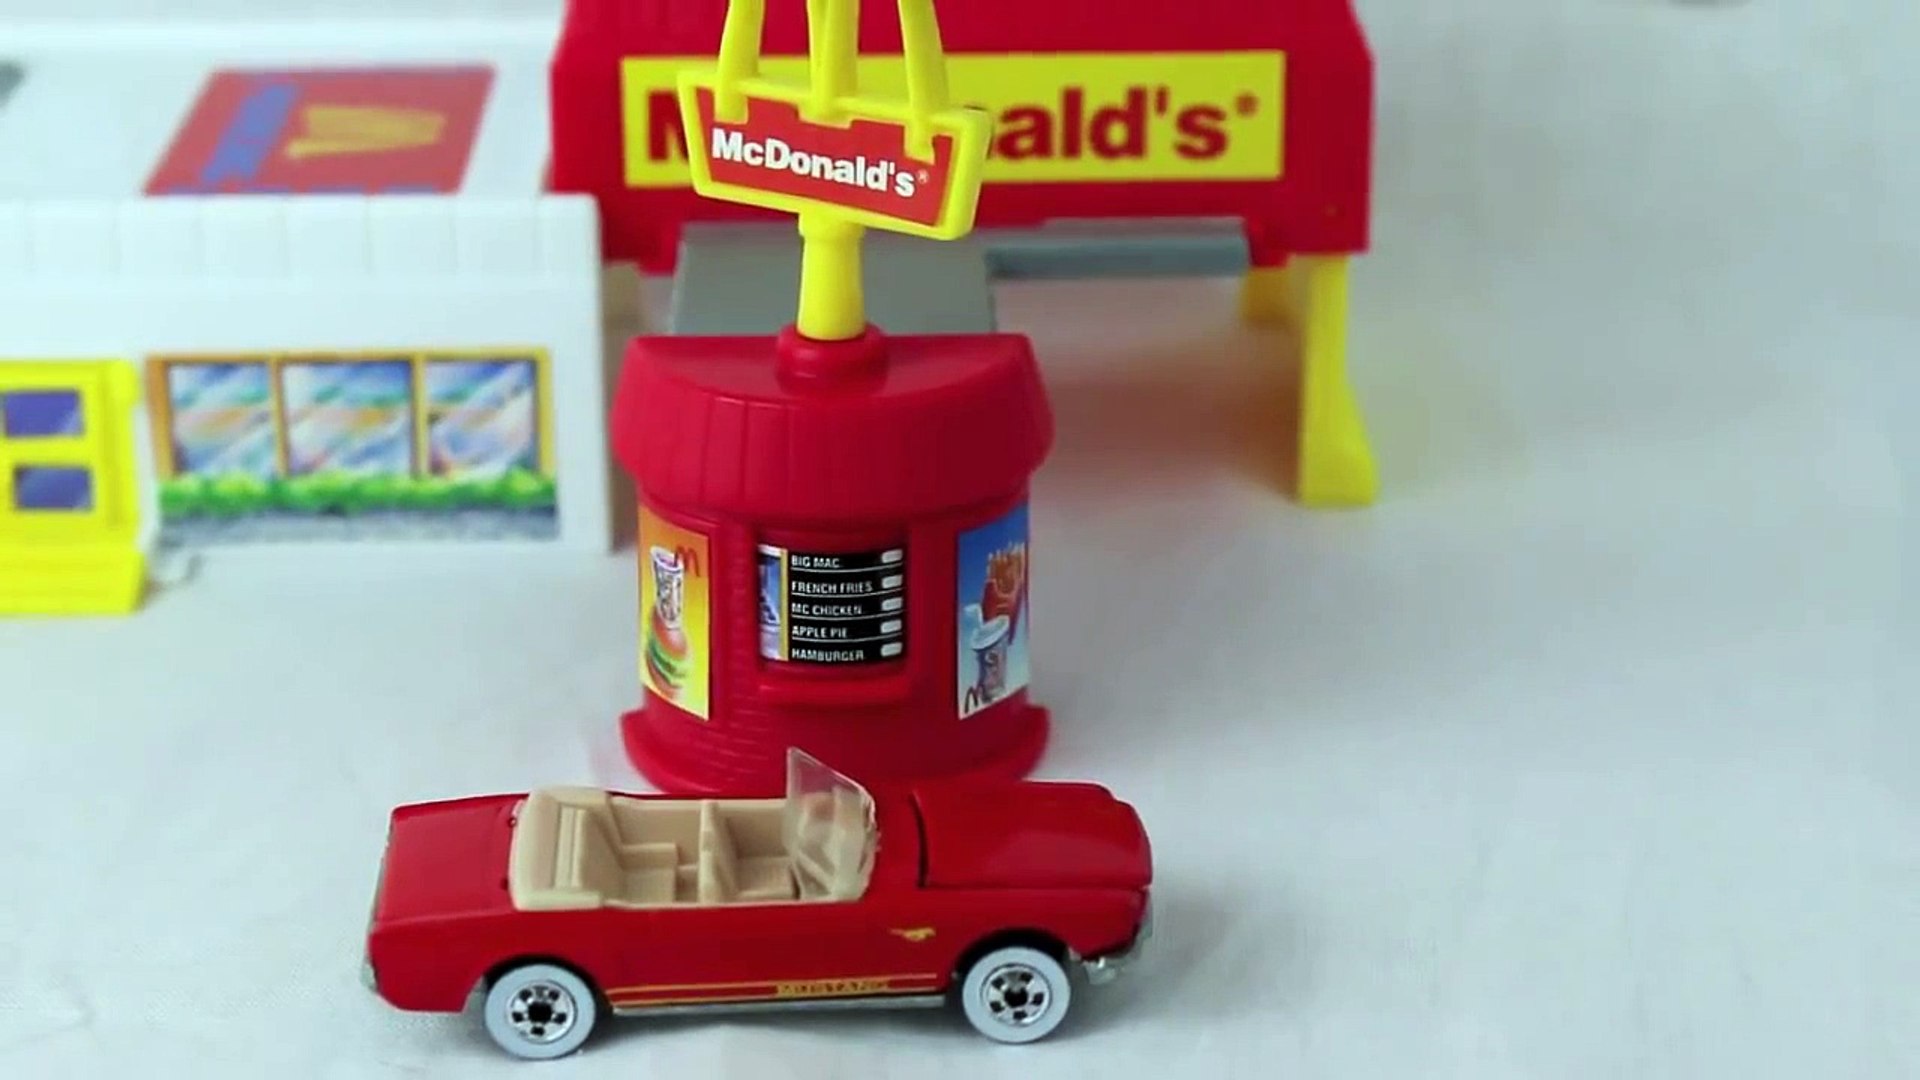 Hot Wheels McDonalds Cars and Guido 1994 McDonalds Restaurant Toy with  Disney Cars Toys Sto & Go - Dailymotion Video